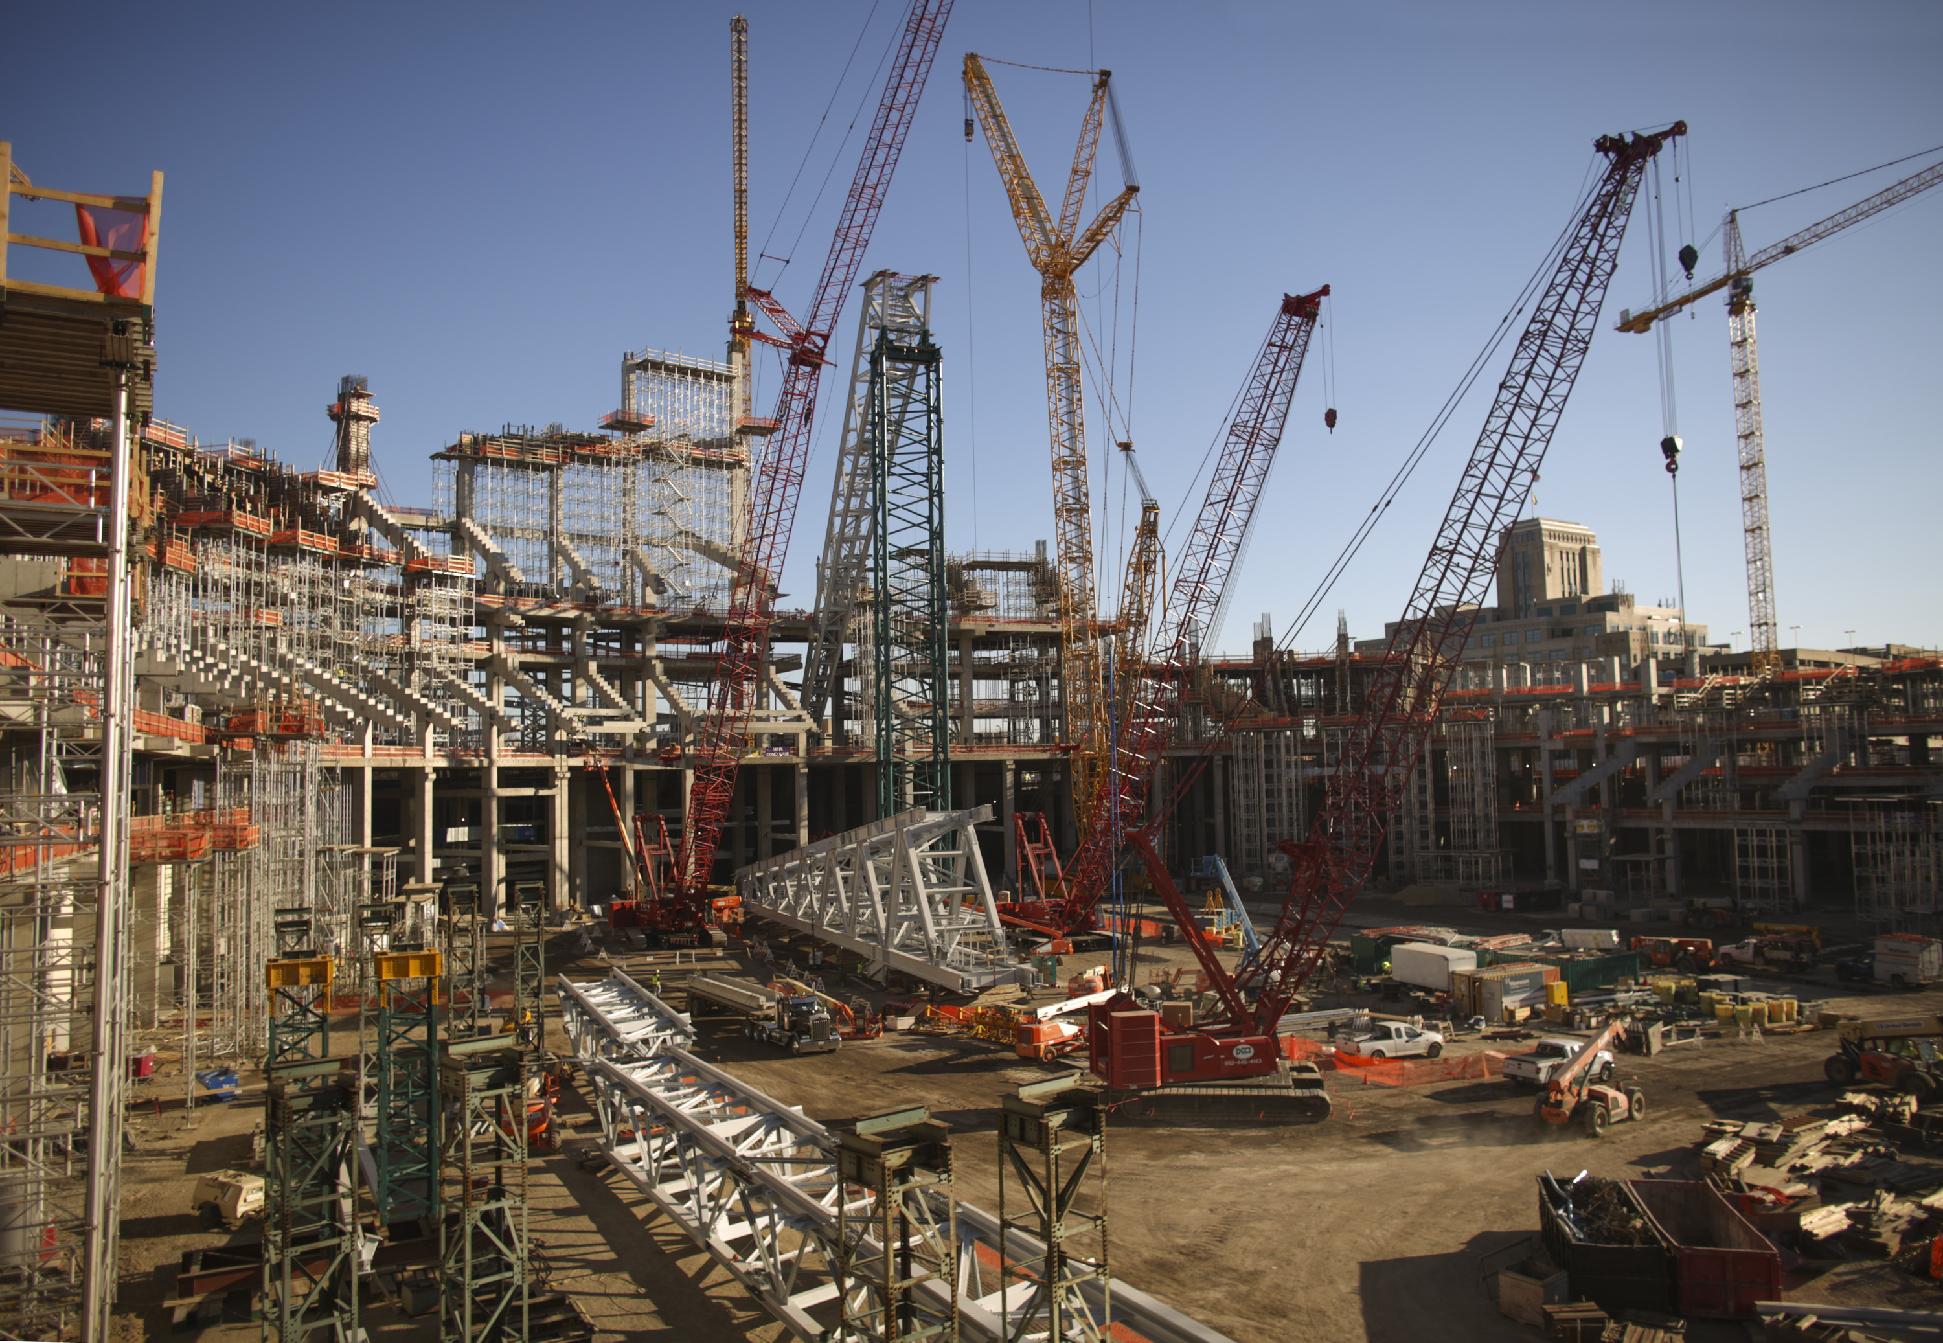 An overall view of the construction progress on the interior of the new Vikings stadium Monday, Oct. 20, 2014. Nine months after the old Metrodome was demolished, officials say the new stadium is 23 percent complete as of the end of September. (AP Photo/The Star Tribune, Jeff Wheeler)